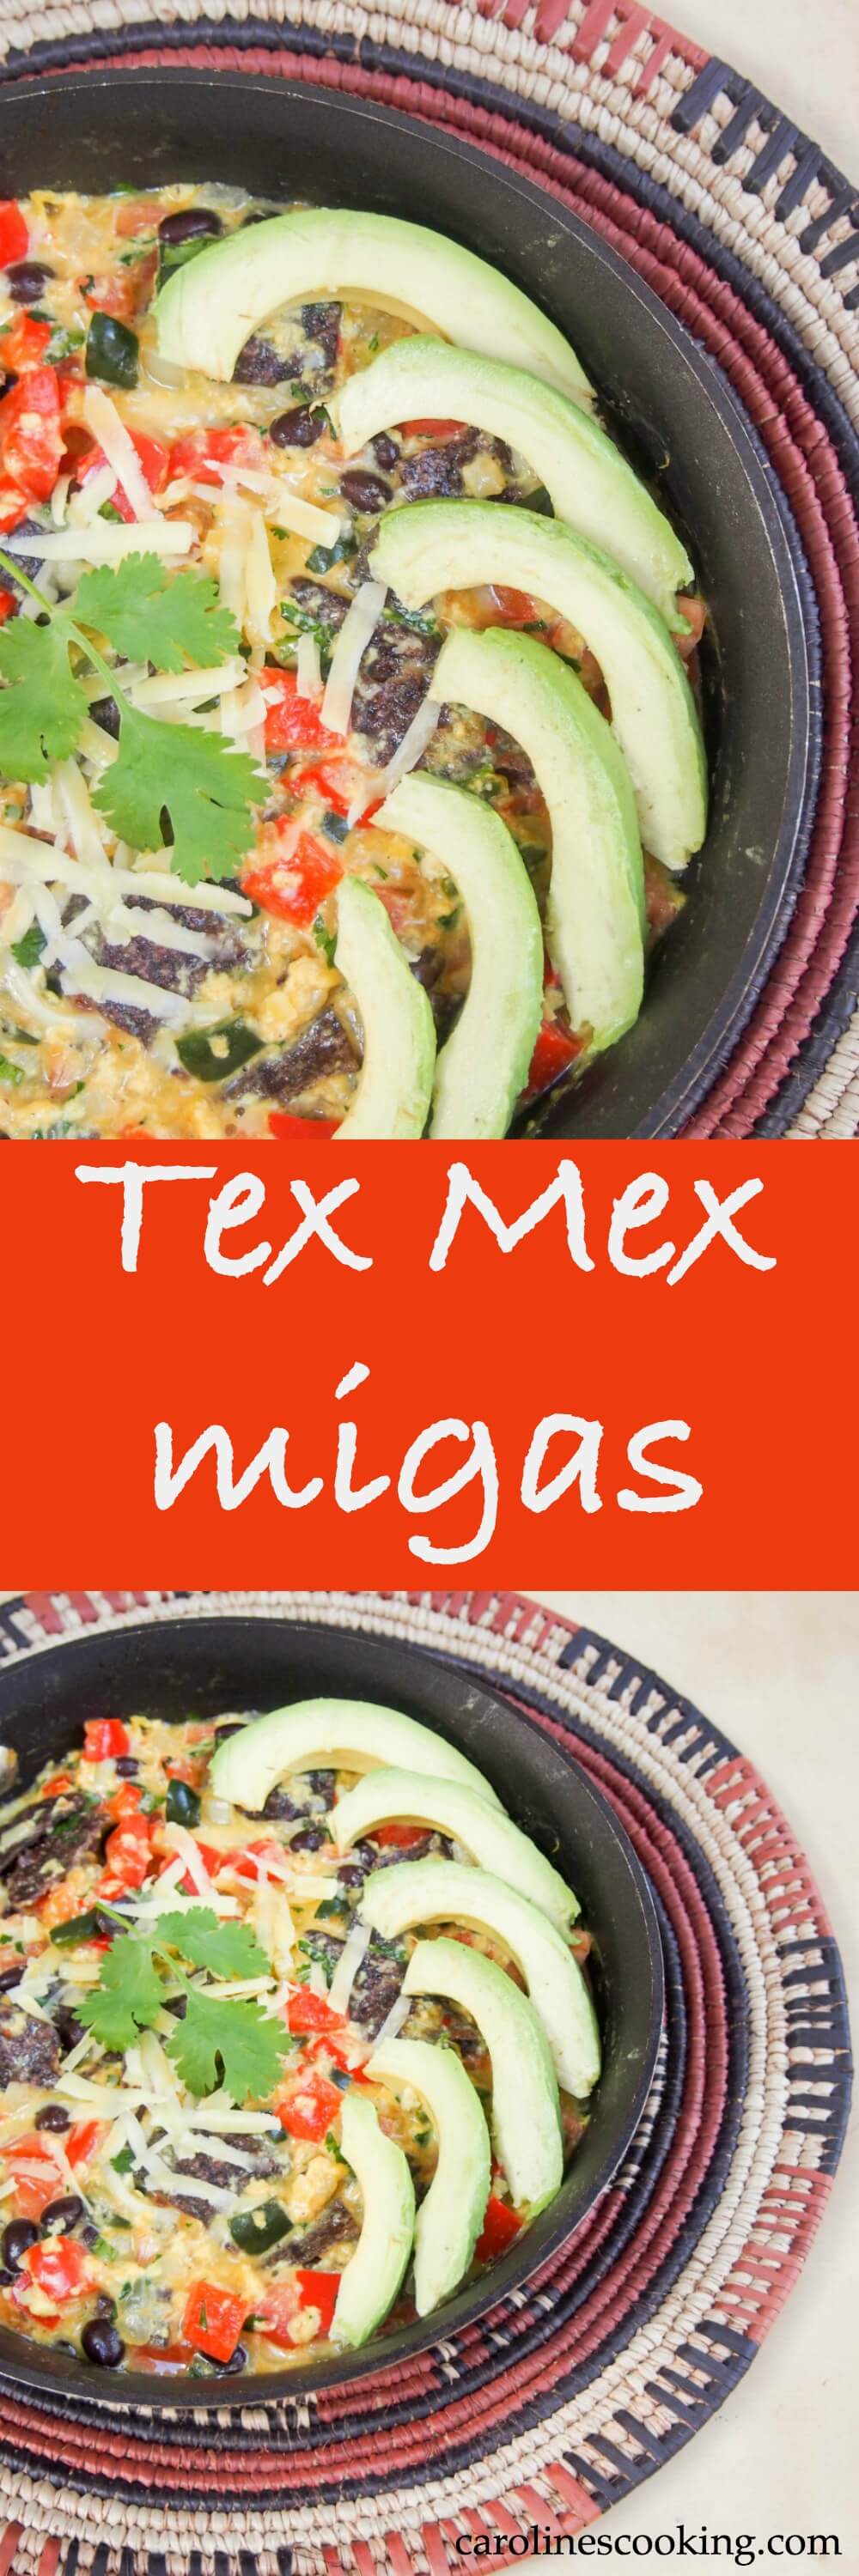 Tex Mex migas are a delicious, easy dish made with eggs, corn tortillas, cheese & salsa ingredients, here freshened up with cilantro, black beans & peppers.  It's typically serves for breakfast but is a delicious meal anytime.  East to make and so comfortable.  #texmex #migas #brunch #eggs #vegetarian